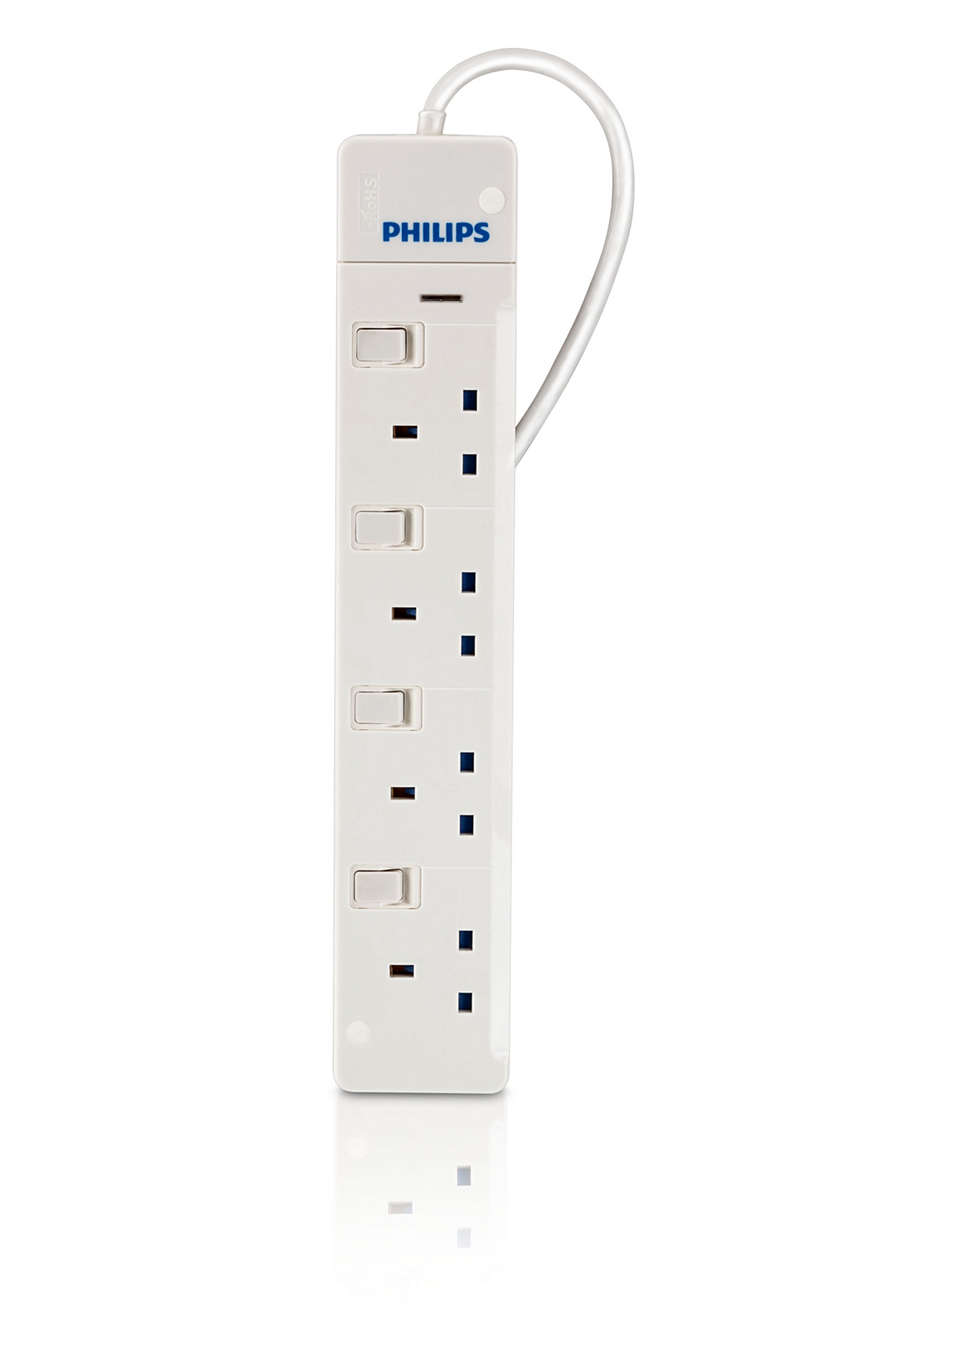 Multiple outlet